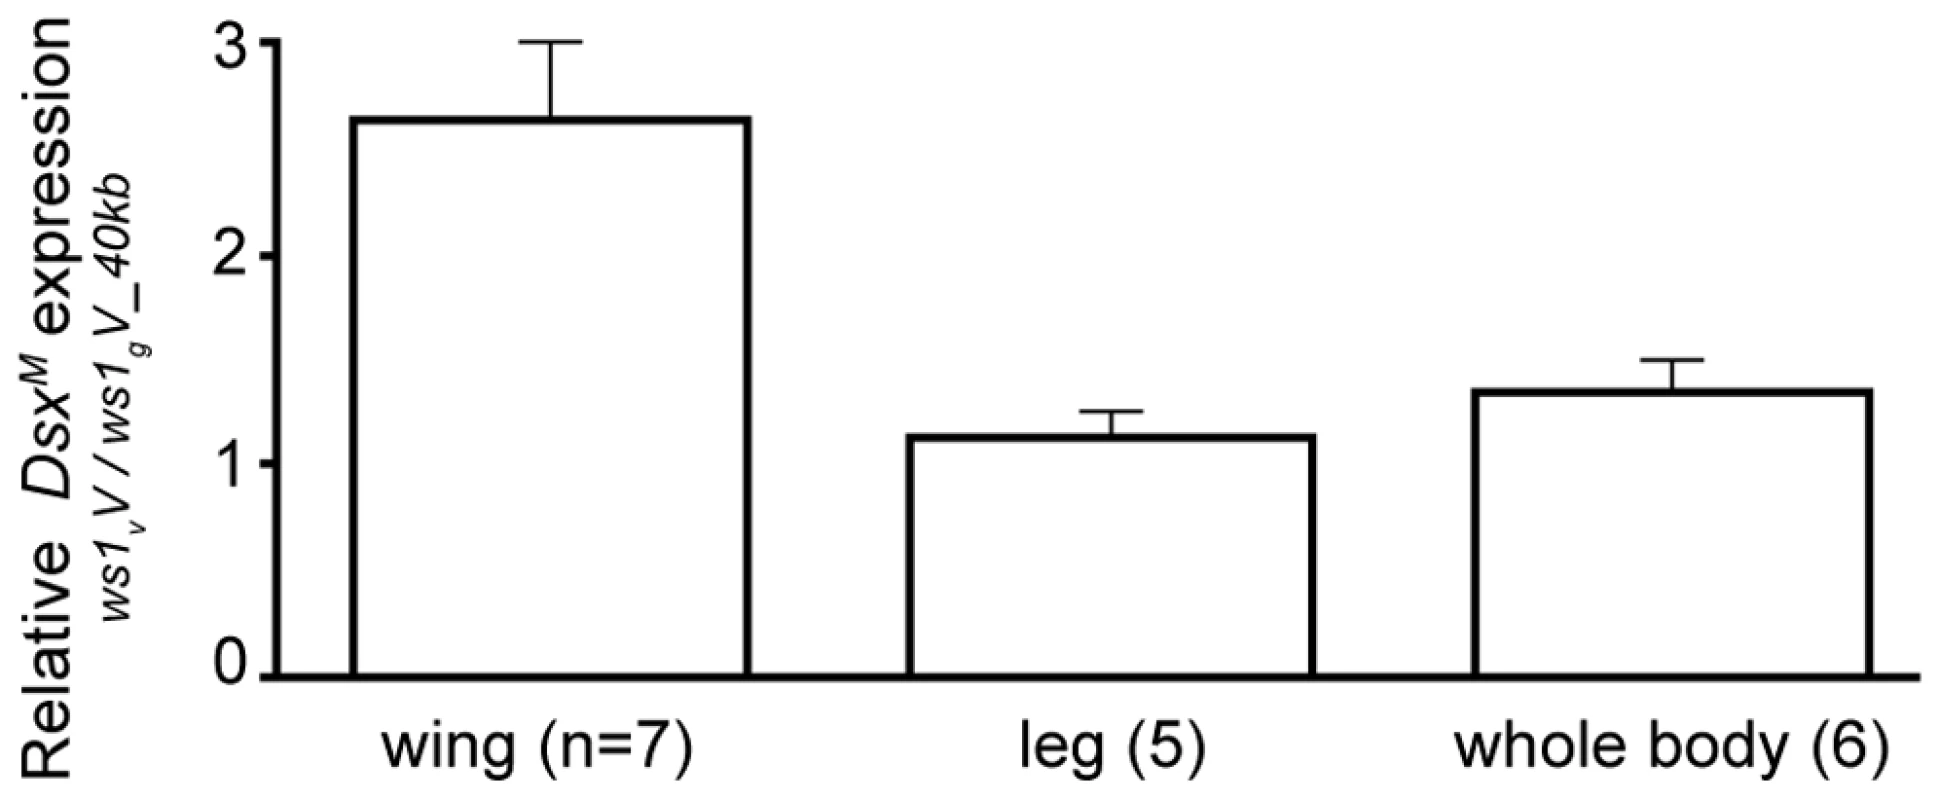 Change in <i>doublesex</i> expression due to <i>ws1.</i>